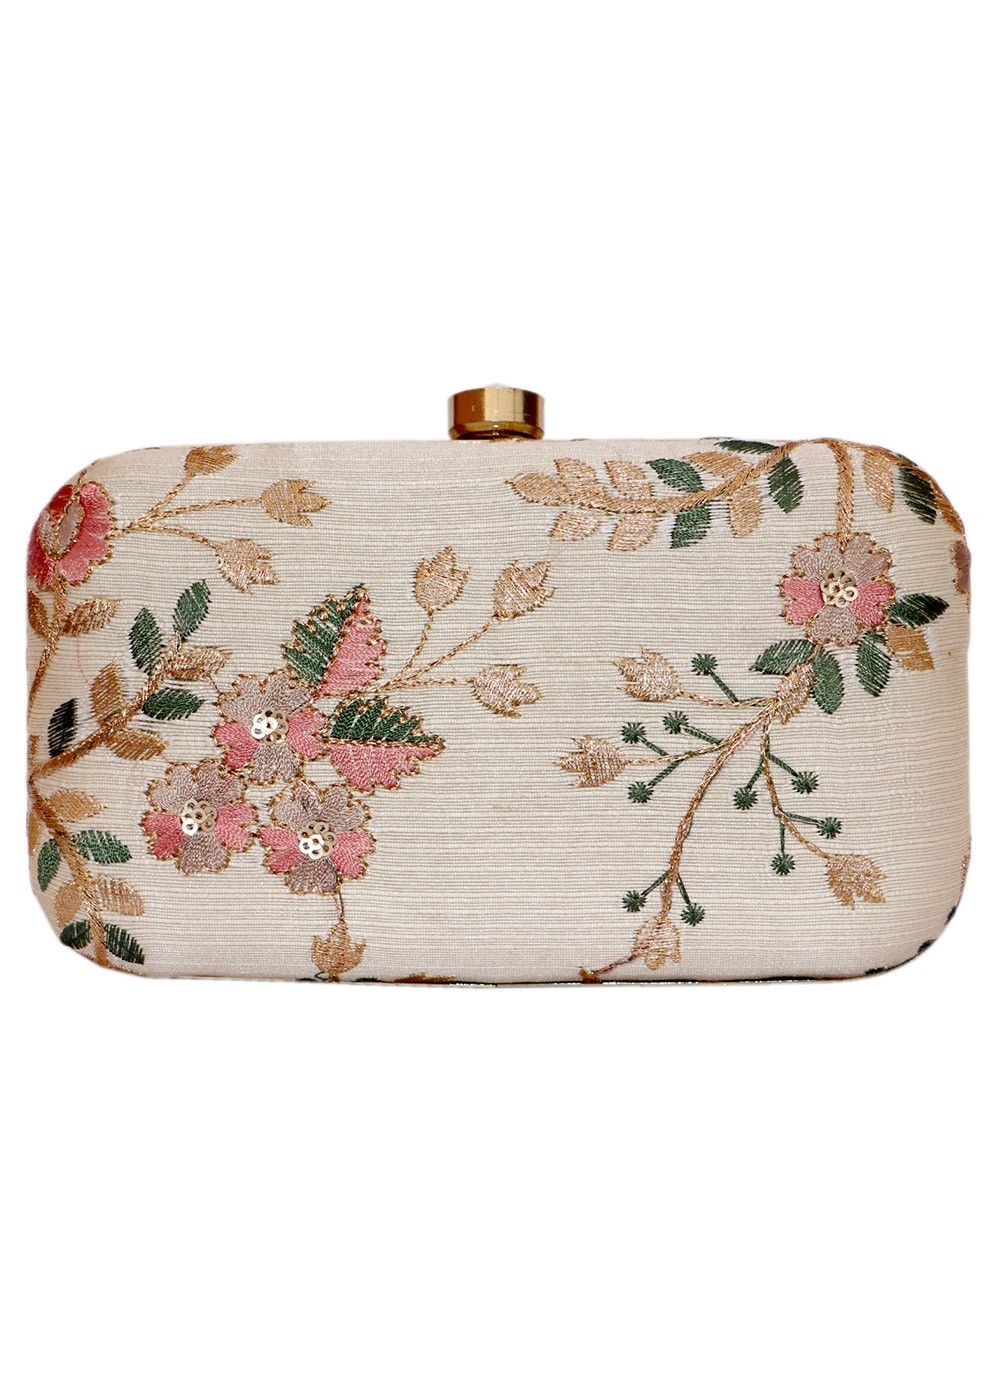 Floral Embroidered White Frame Box Clutch 103BG01